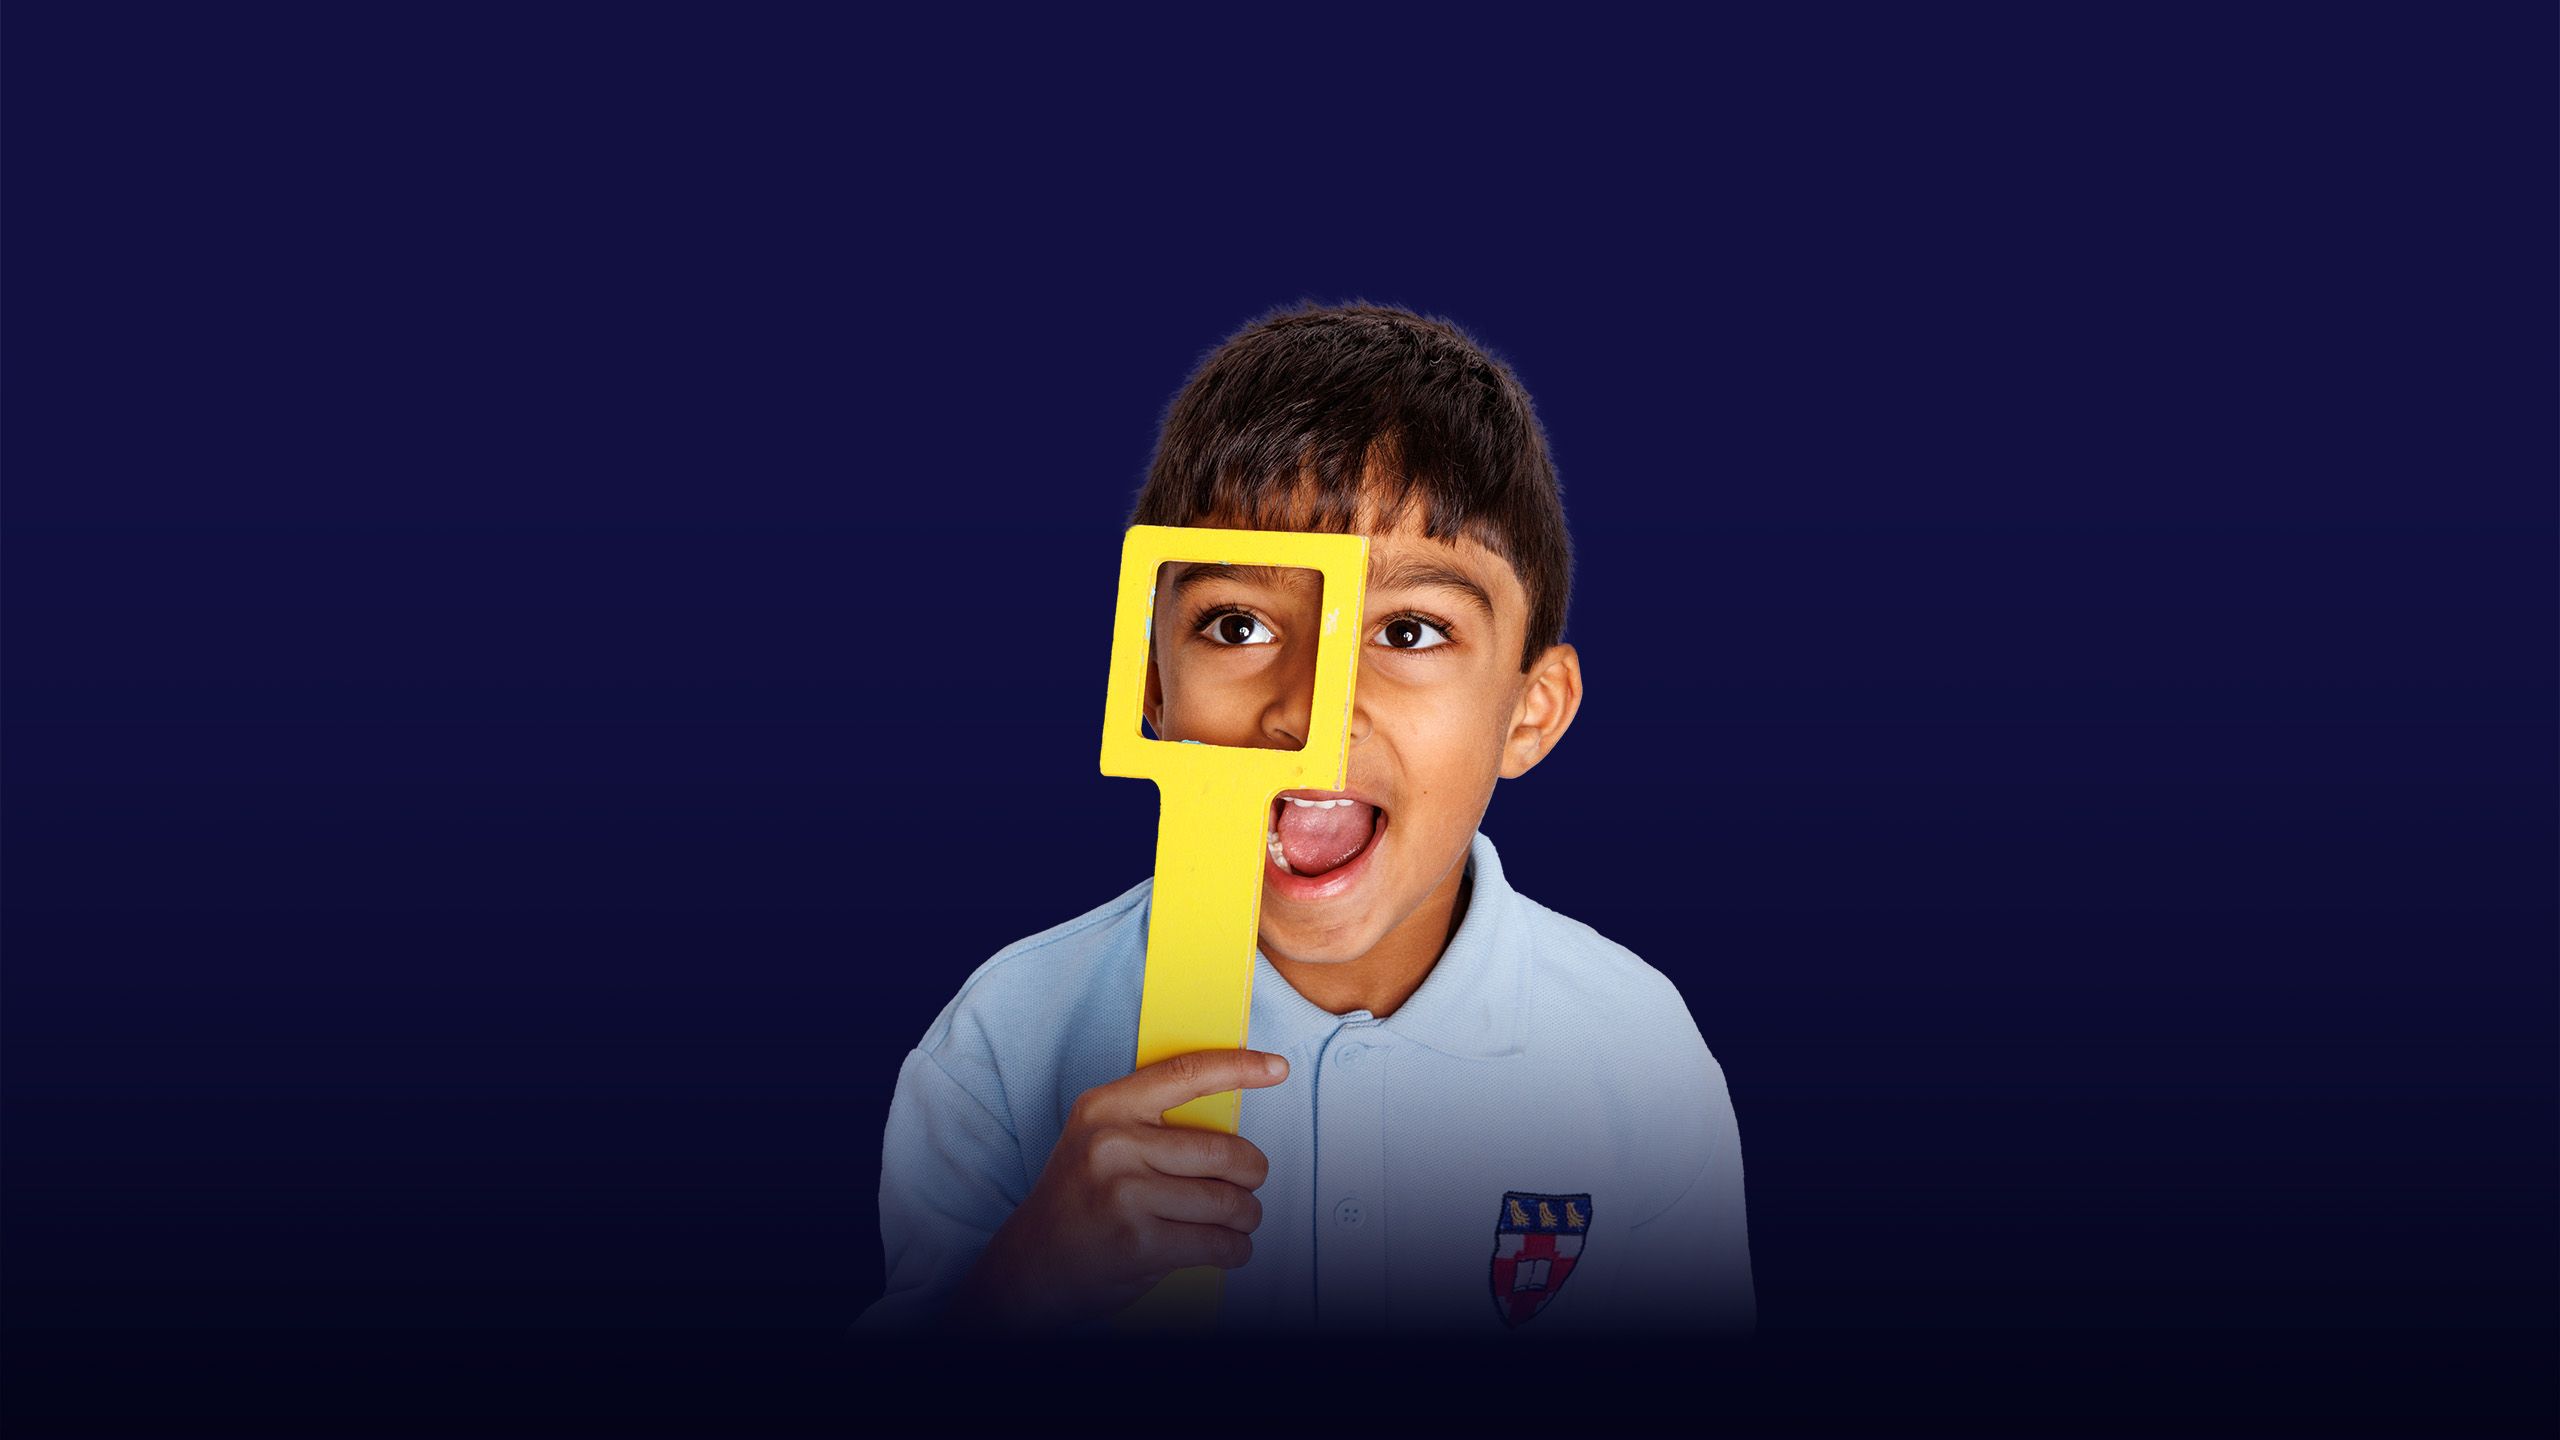 Image of a little boy looking through an object with an overlay of the text "inspiring minds" 